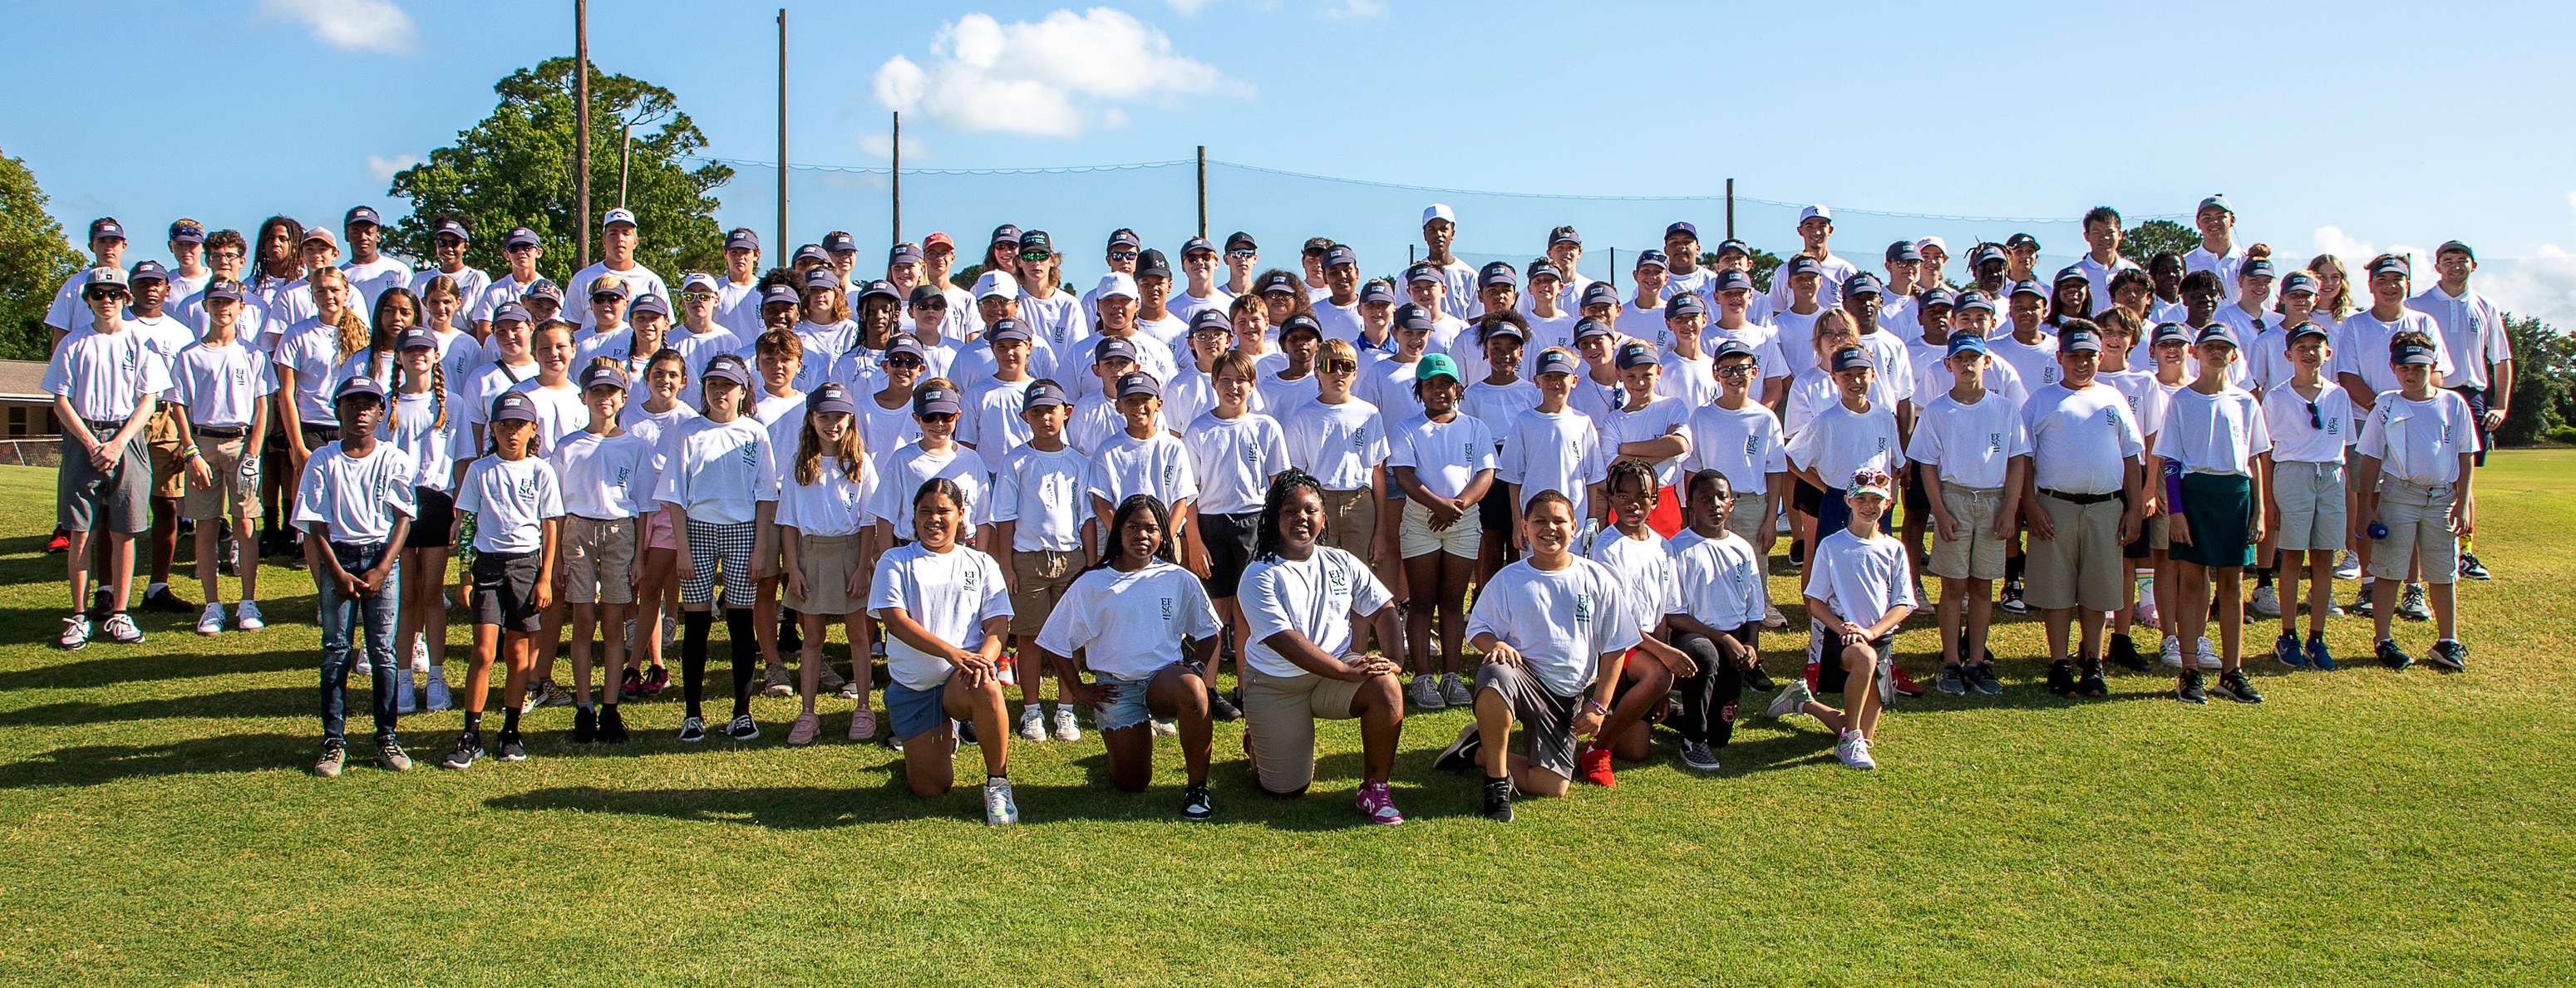 Youth golf camp has largest group in 30 year history